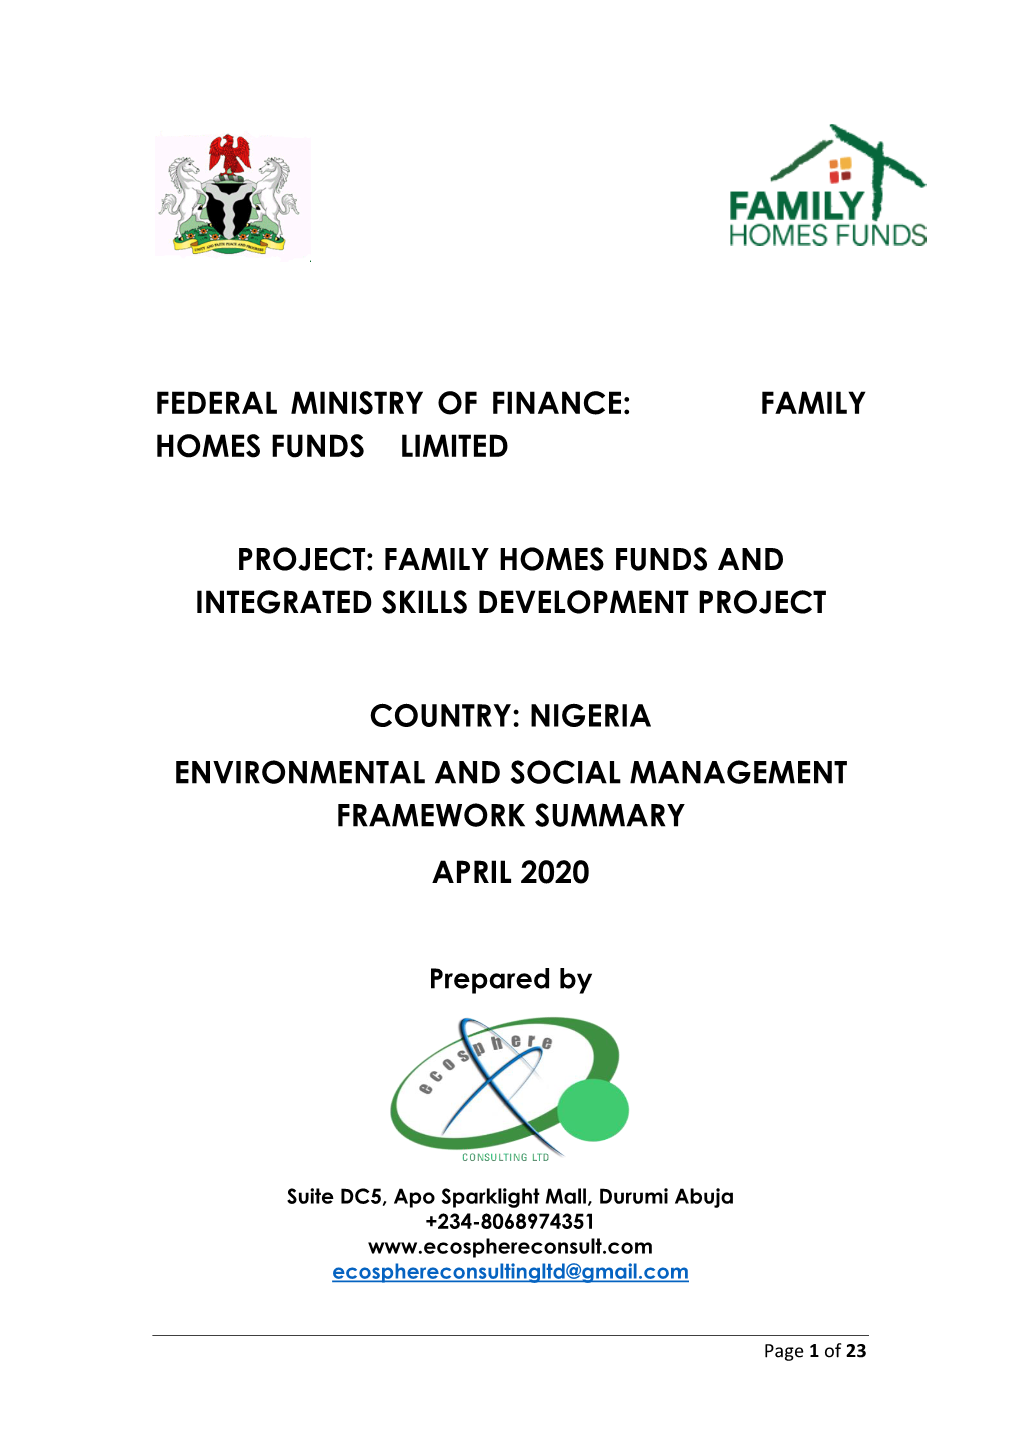 Federal Ministry of Finance: Family Homes Funds Limited